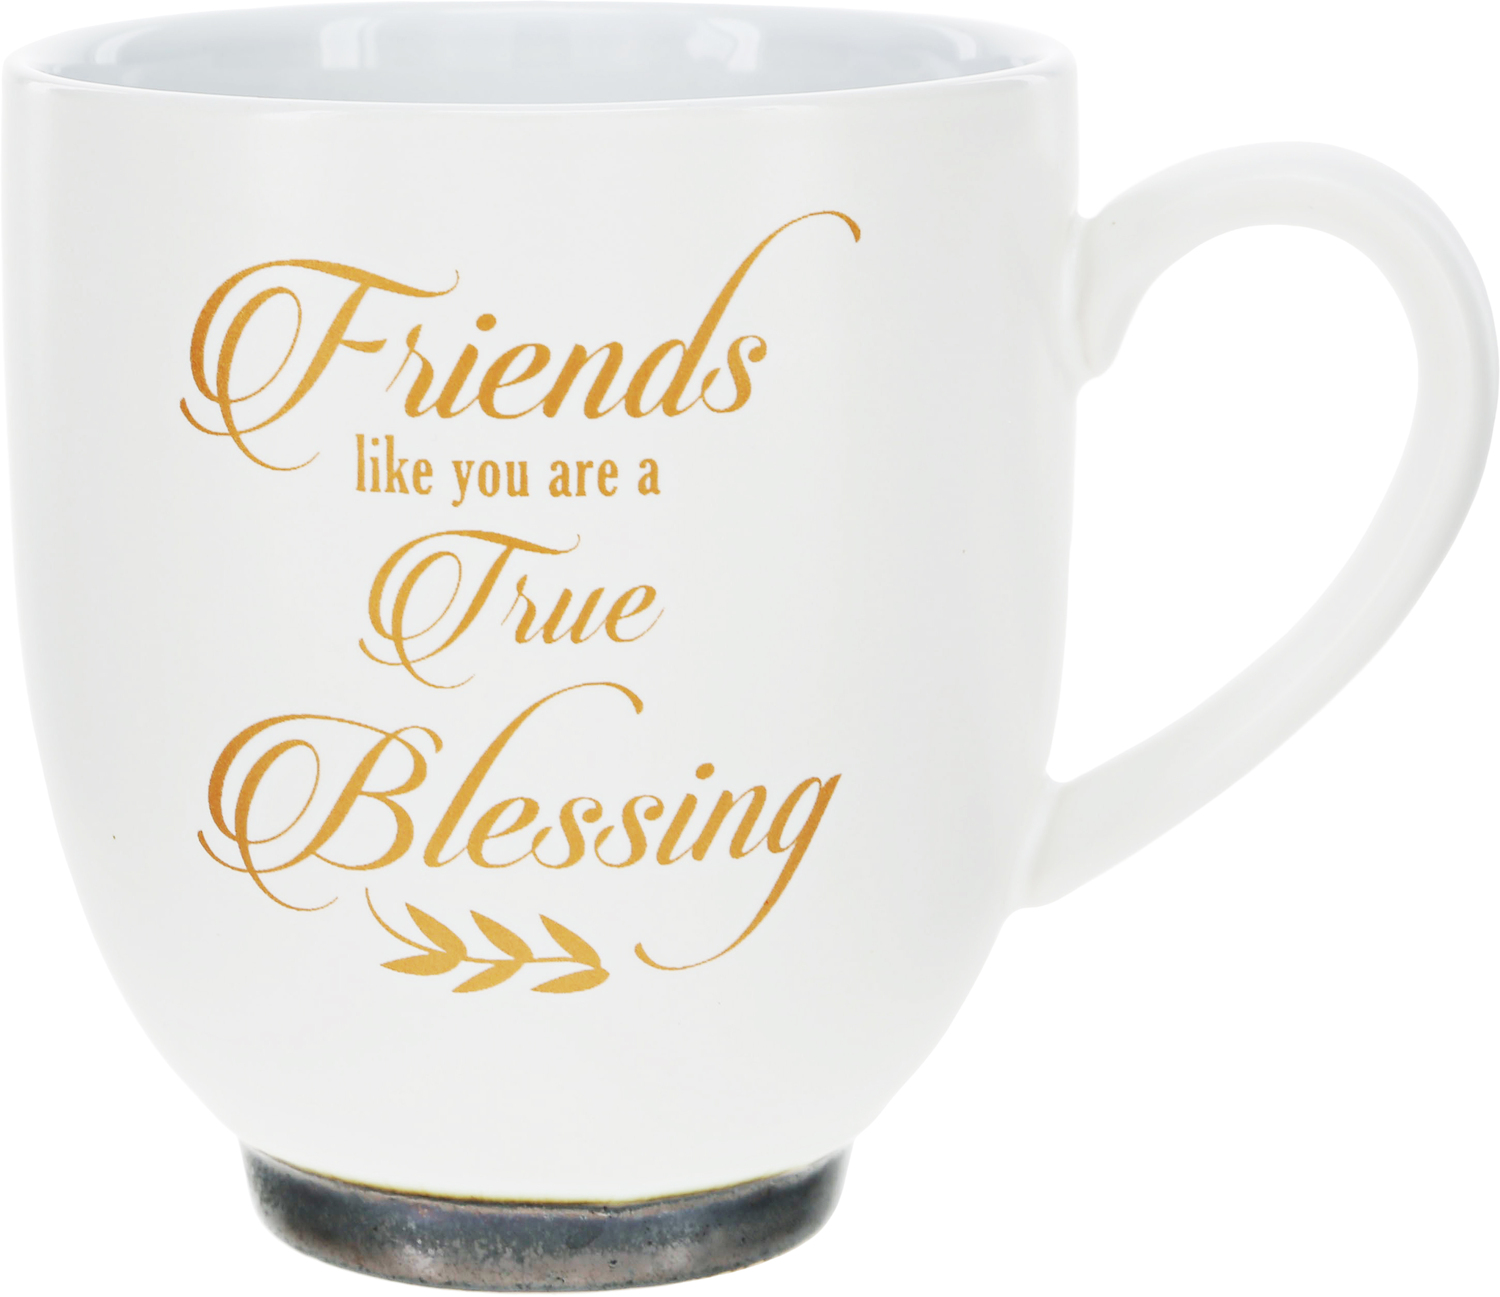 Friends by Blessed by You - Friends - 15.5 oz Cup